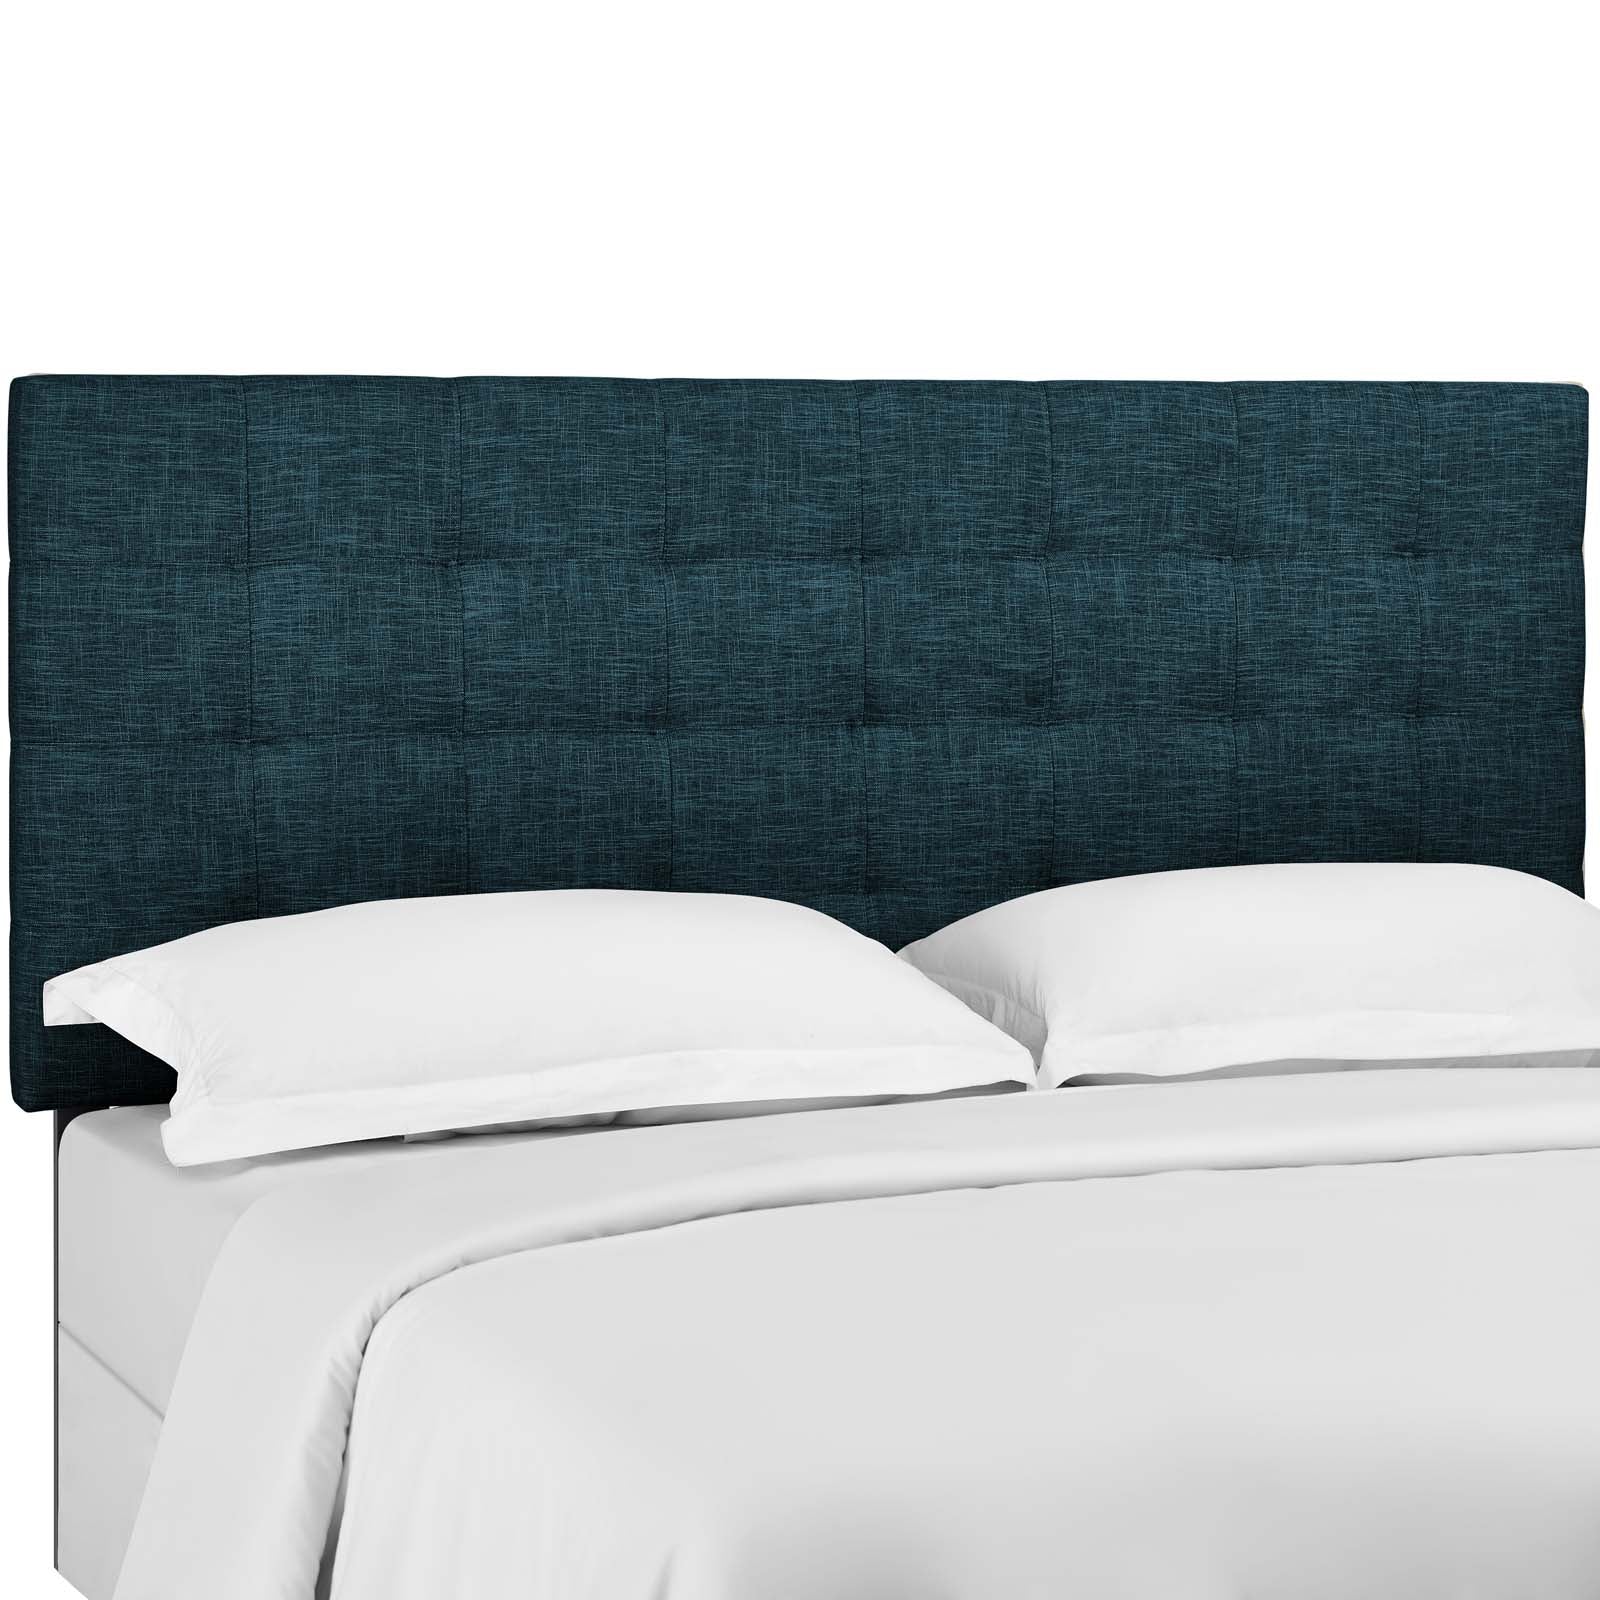 Paisley Tufted Twin Upholstered Linen Fabric Headboard - East Shore Modern Home Furnishings